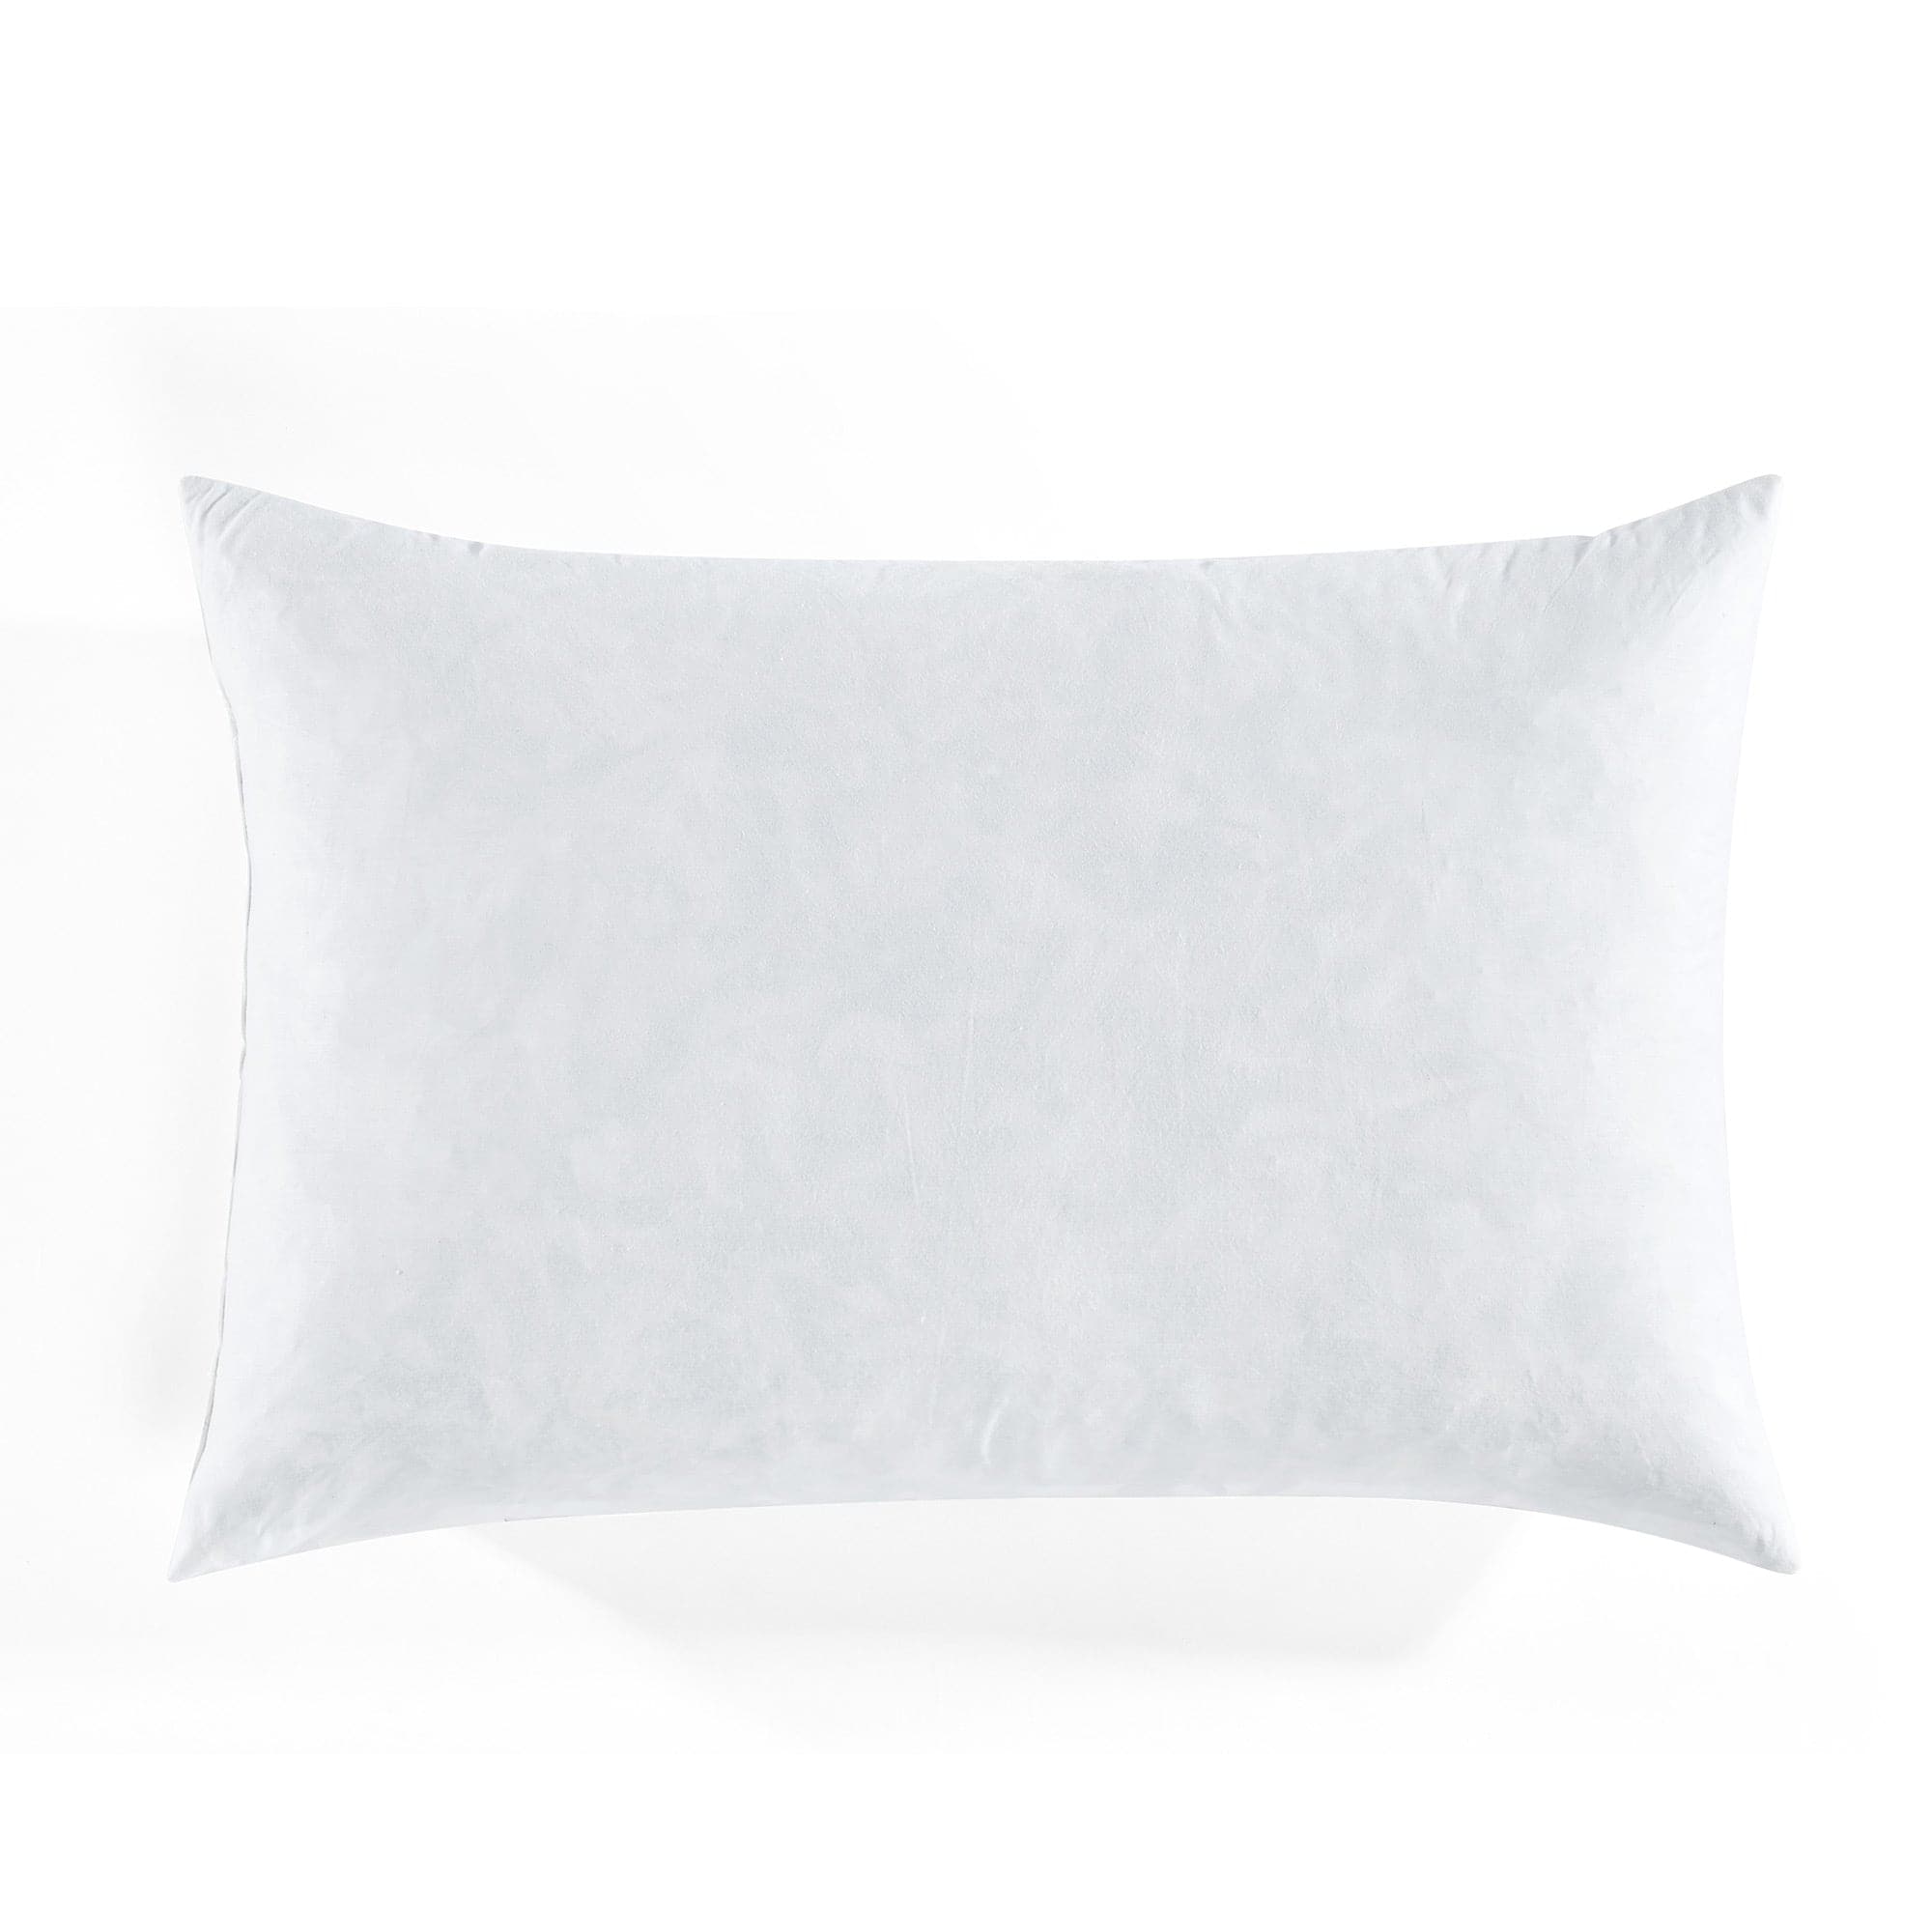 95% Feather 5% Down - Rectangle Decorative Pillow Insert - MADE IN